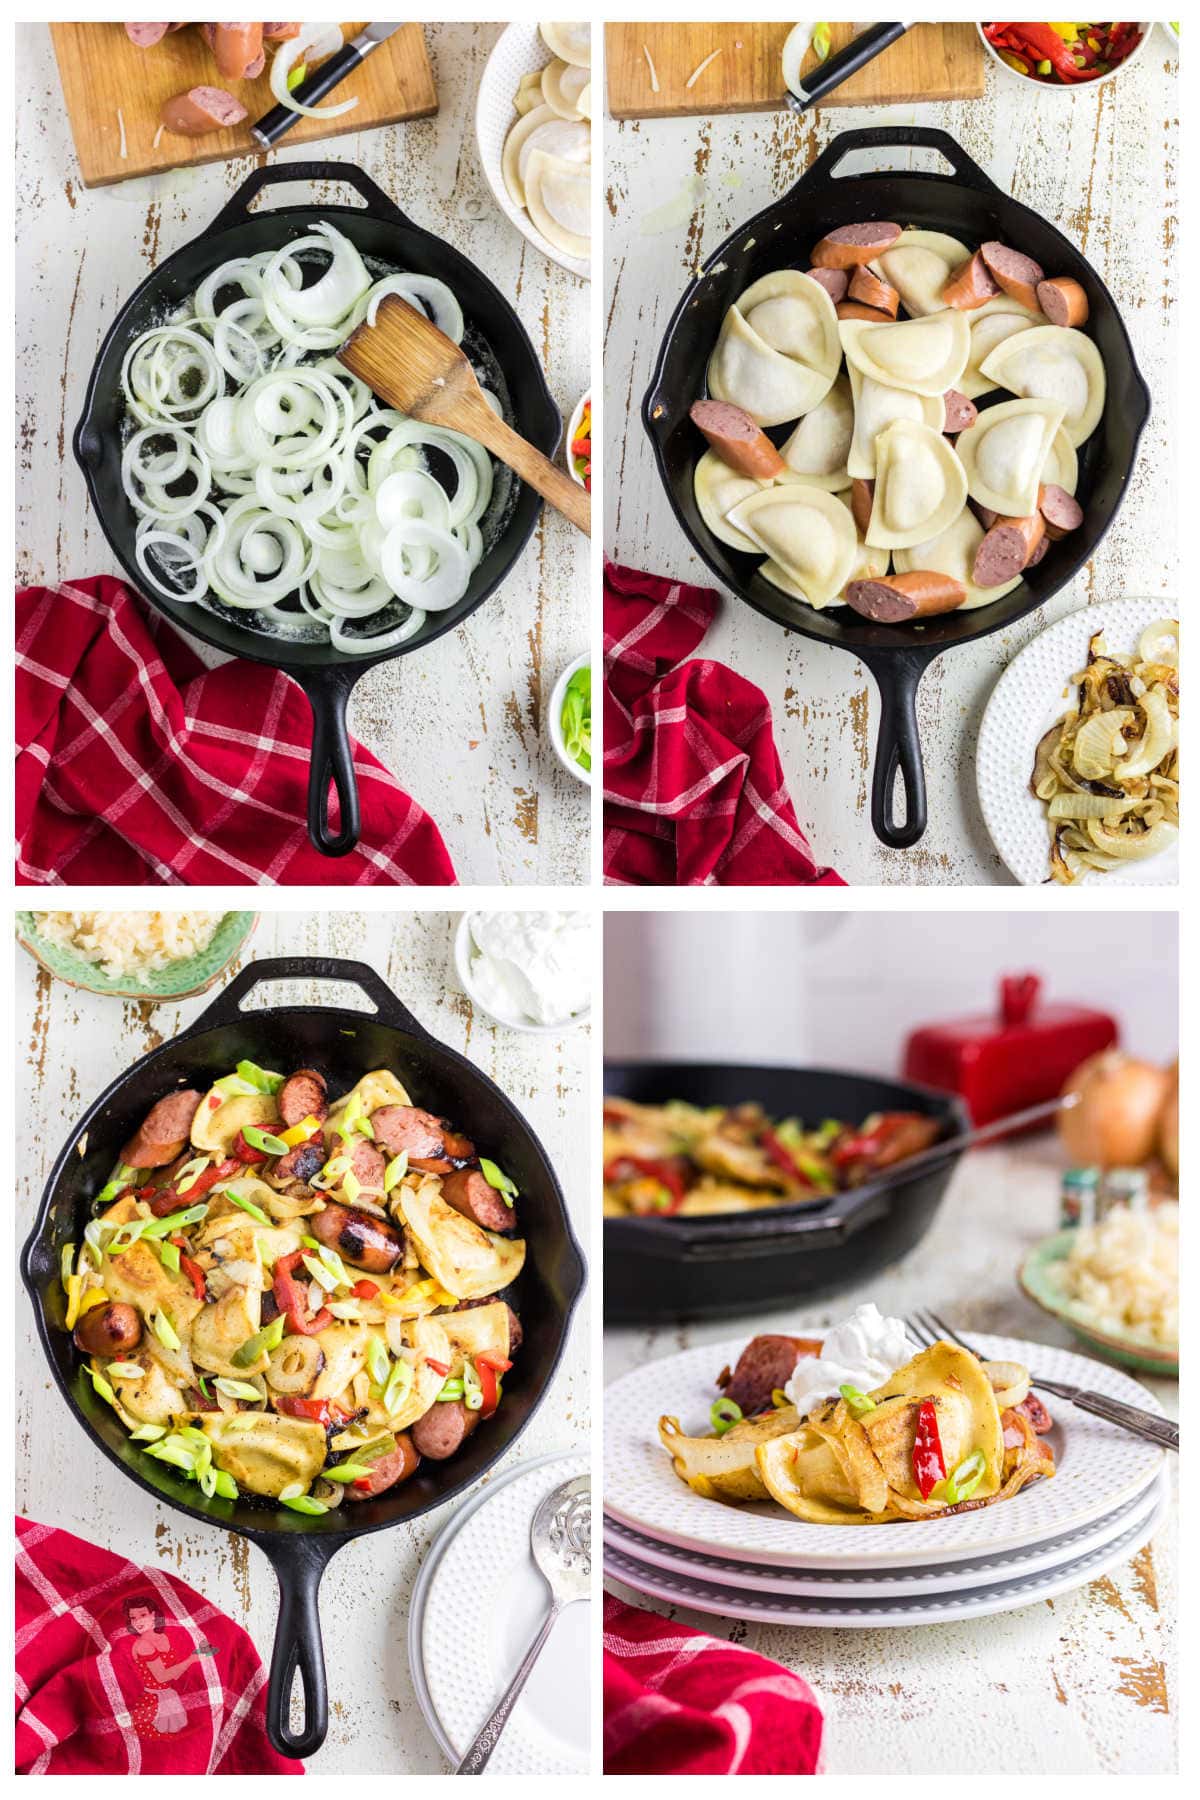 Step by step images showing how to make this pierogi kielbasa skillet dinner.